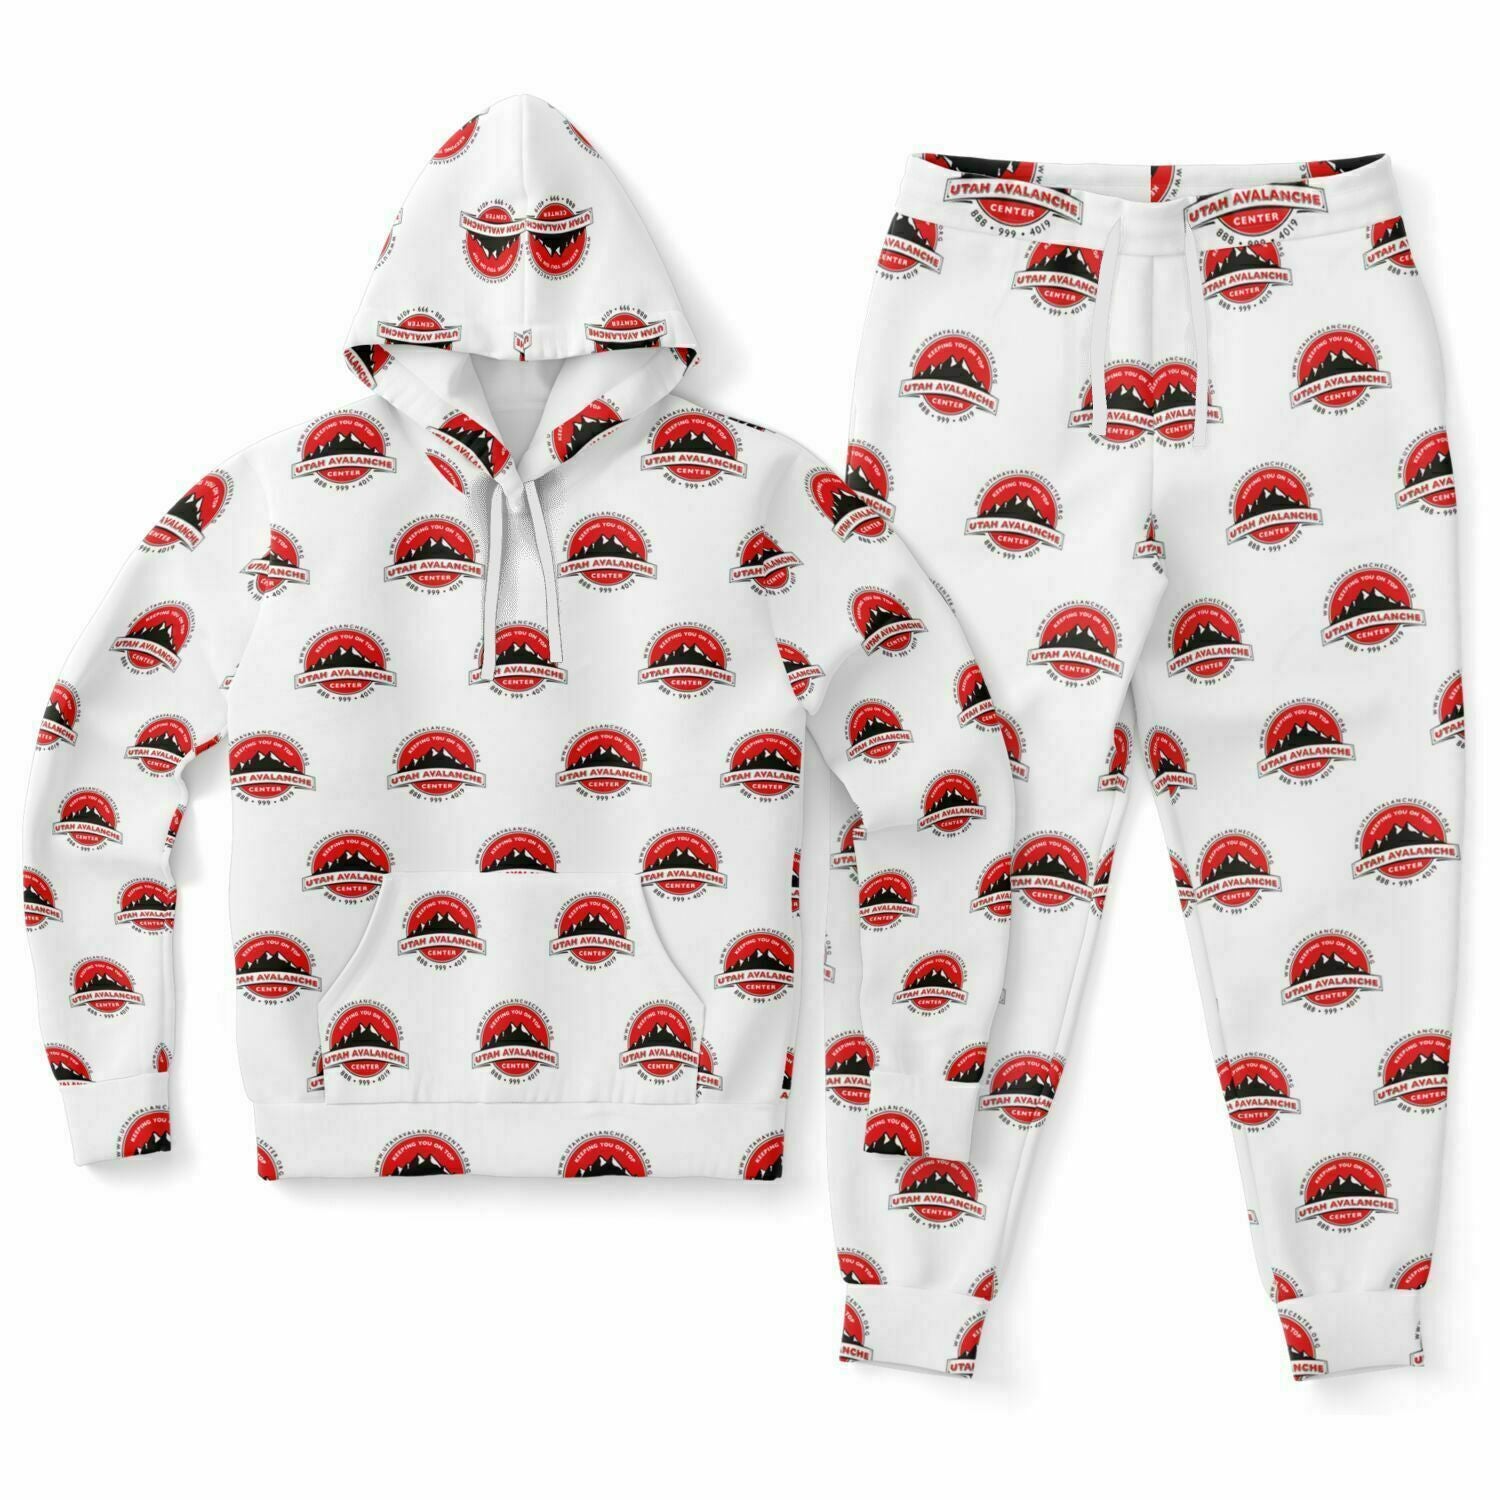 Utah Avalanche Center hoodie and Jogger Set